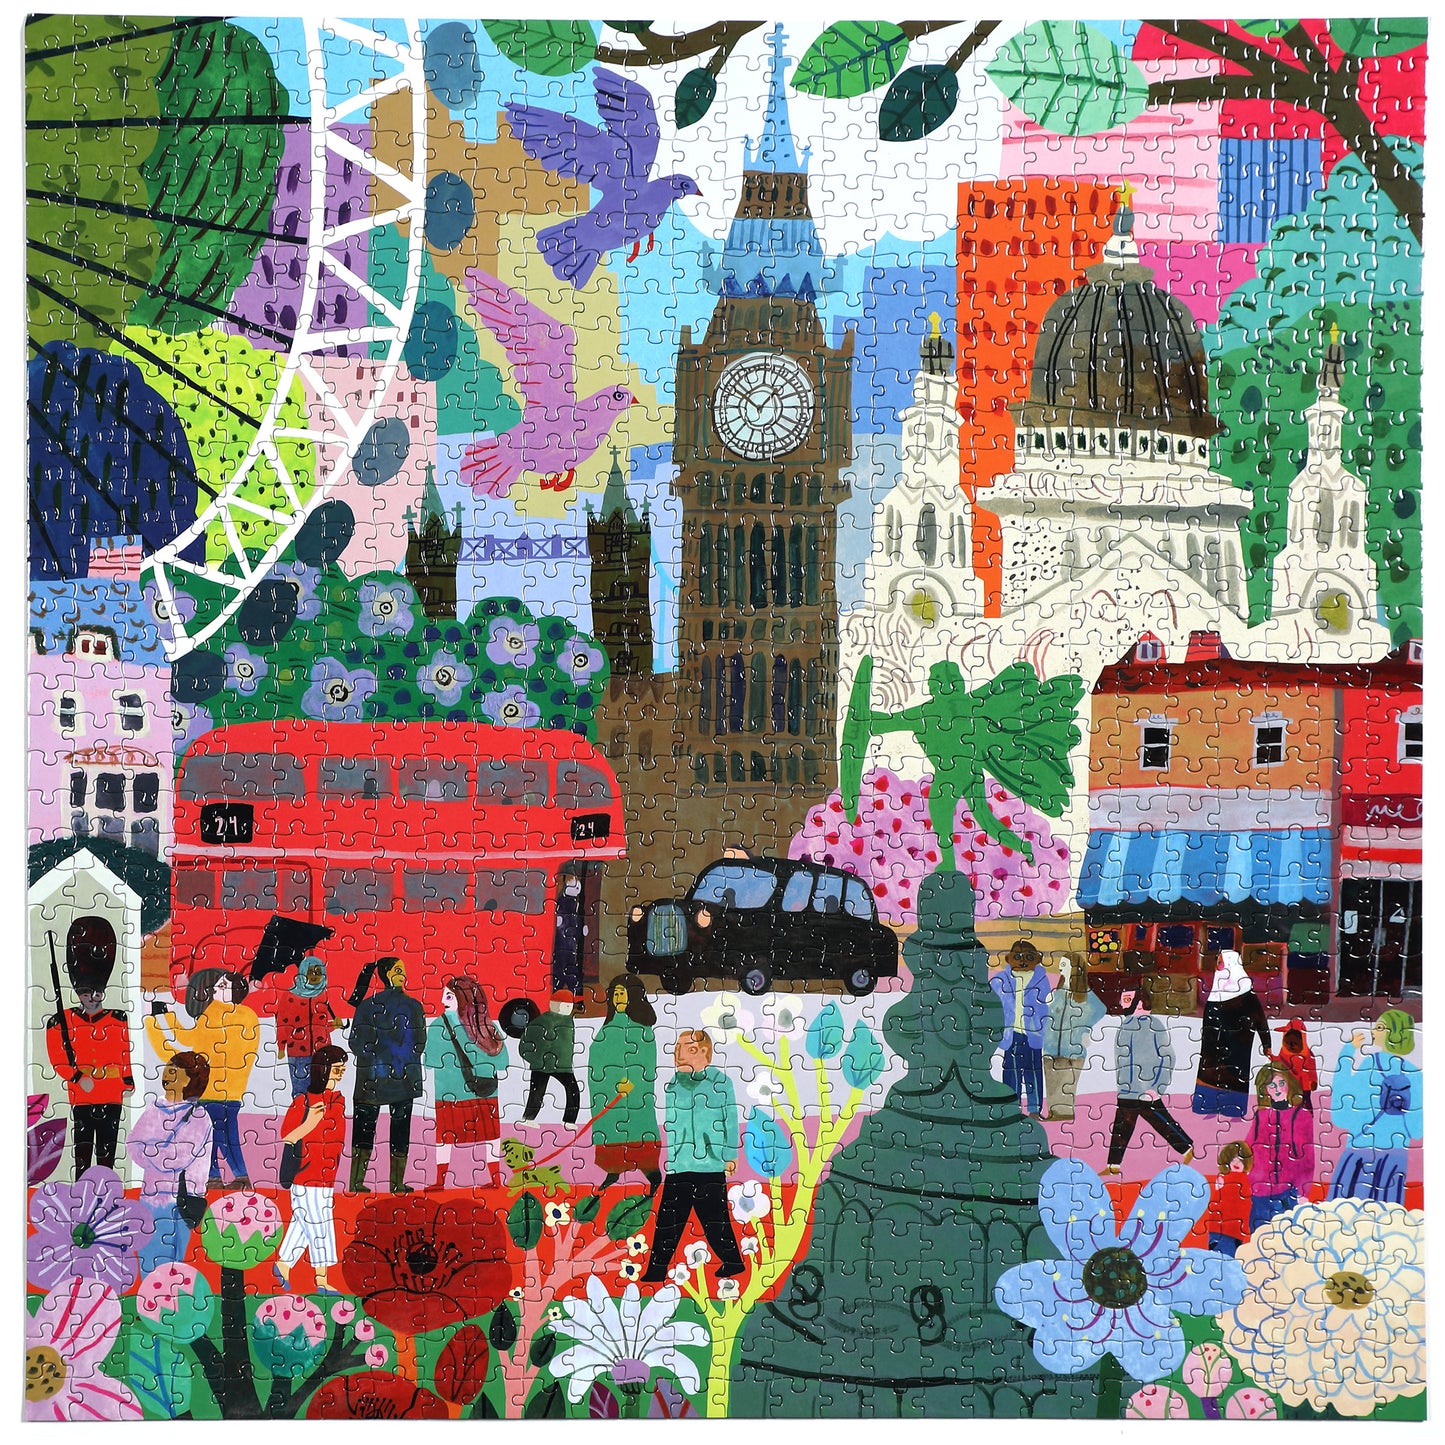 London England Life Big Ben 1000 Piece Jigsaw Puzzle | eeBoo Piece & Love | Gifts for Travel Lovers